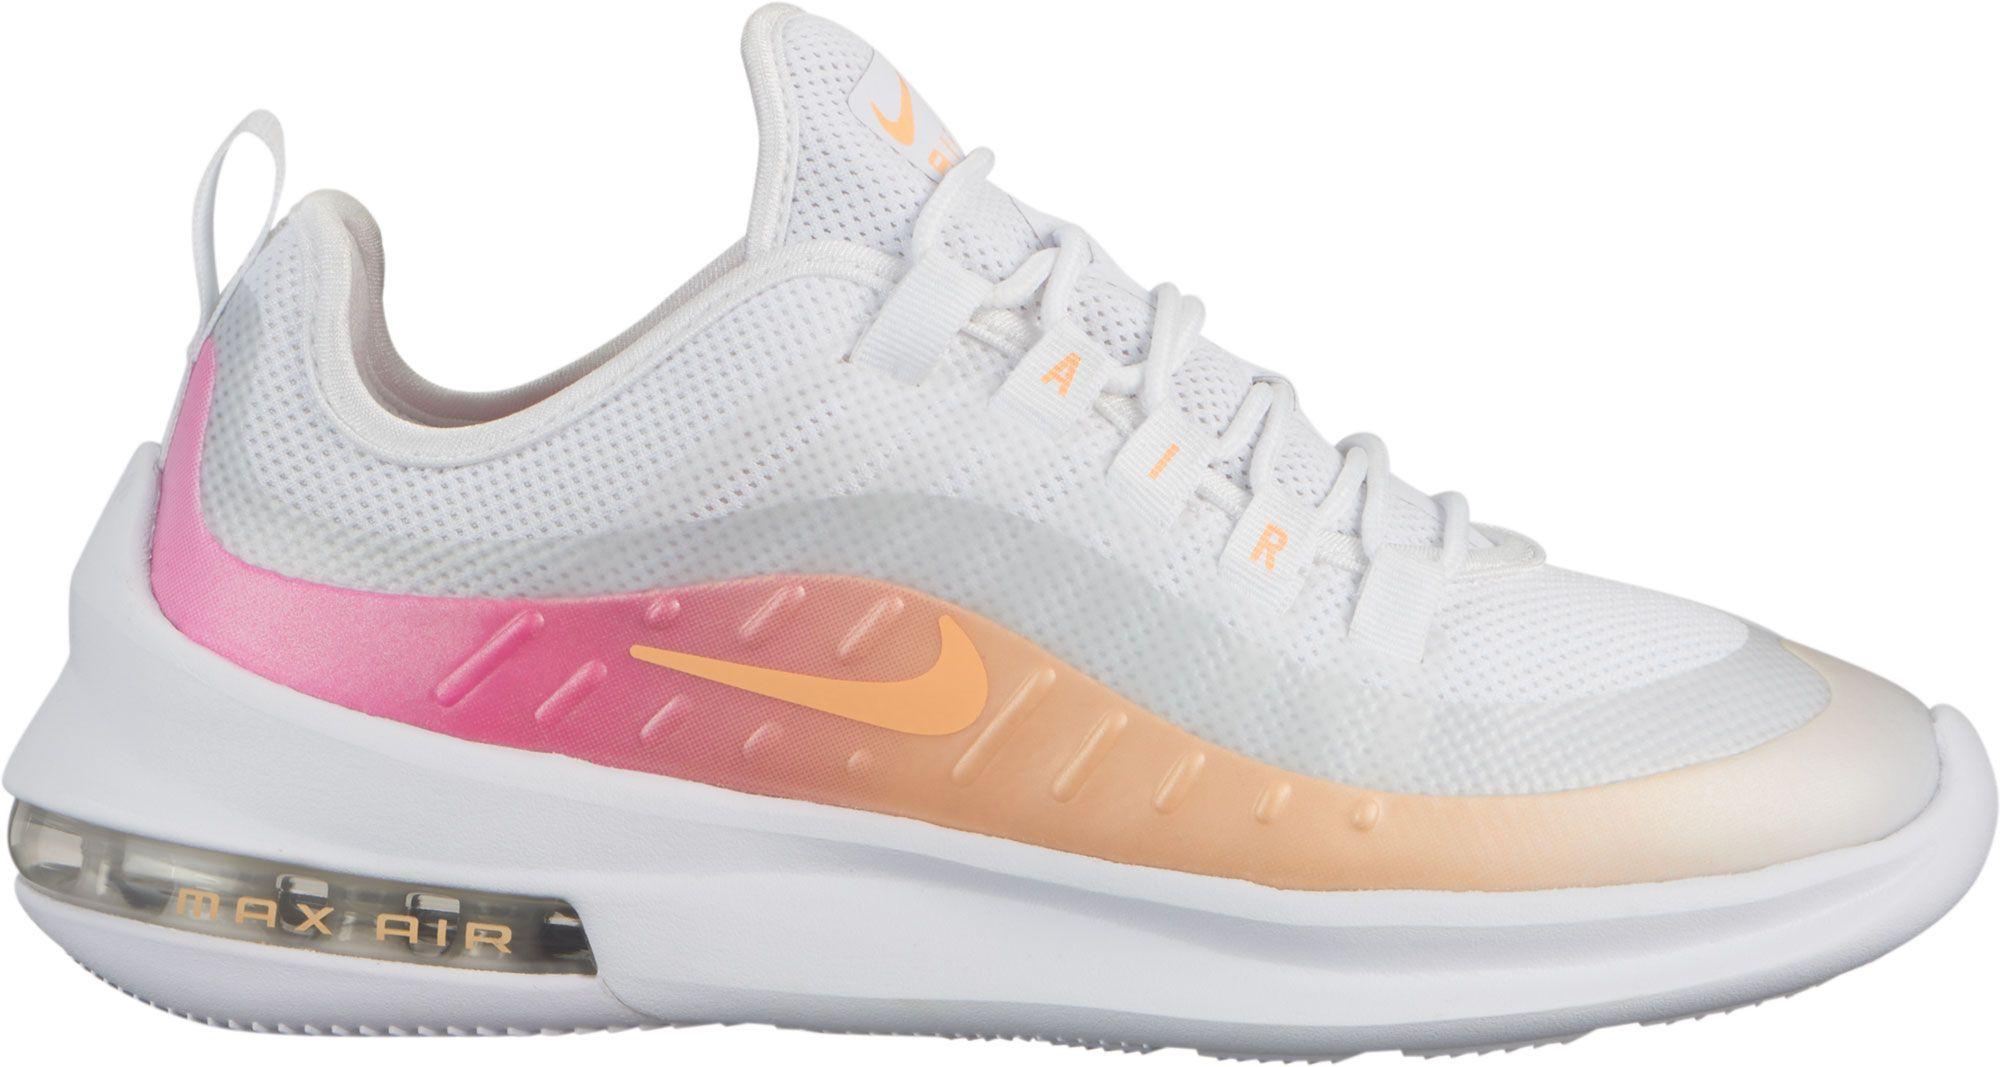 Nike Lace Air Max Axis Shoes in White/Orange/Pink (White) - Lyst